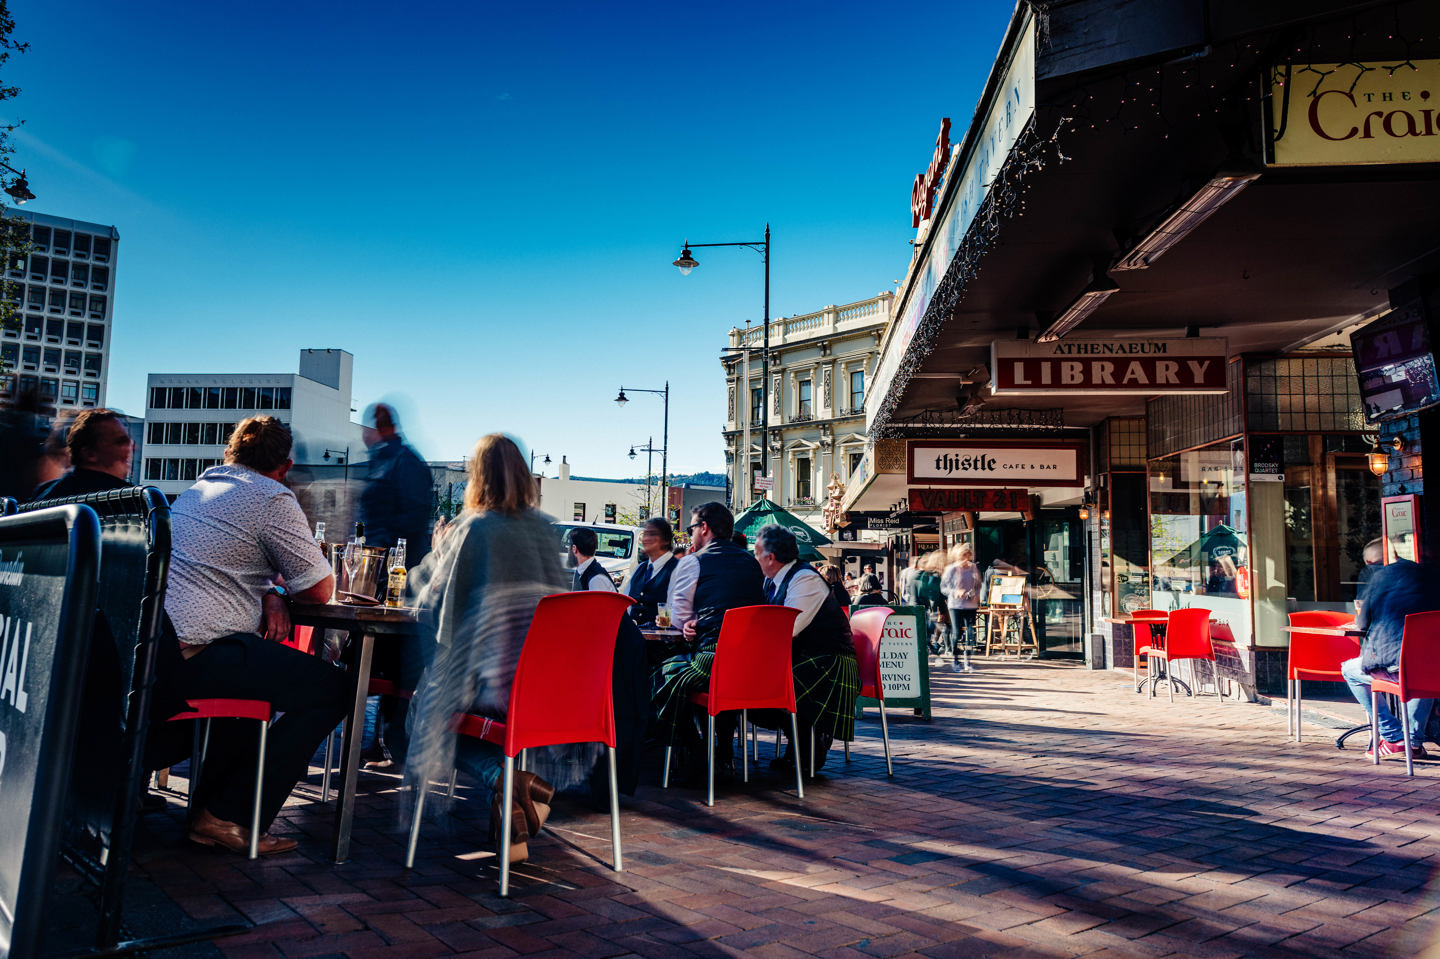 Photo of people sitting outside a restaurant in The Octagon, Dunedin with blue skies in the background.